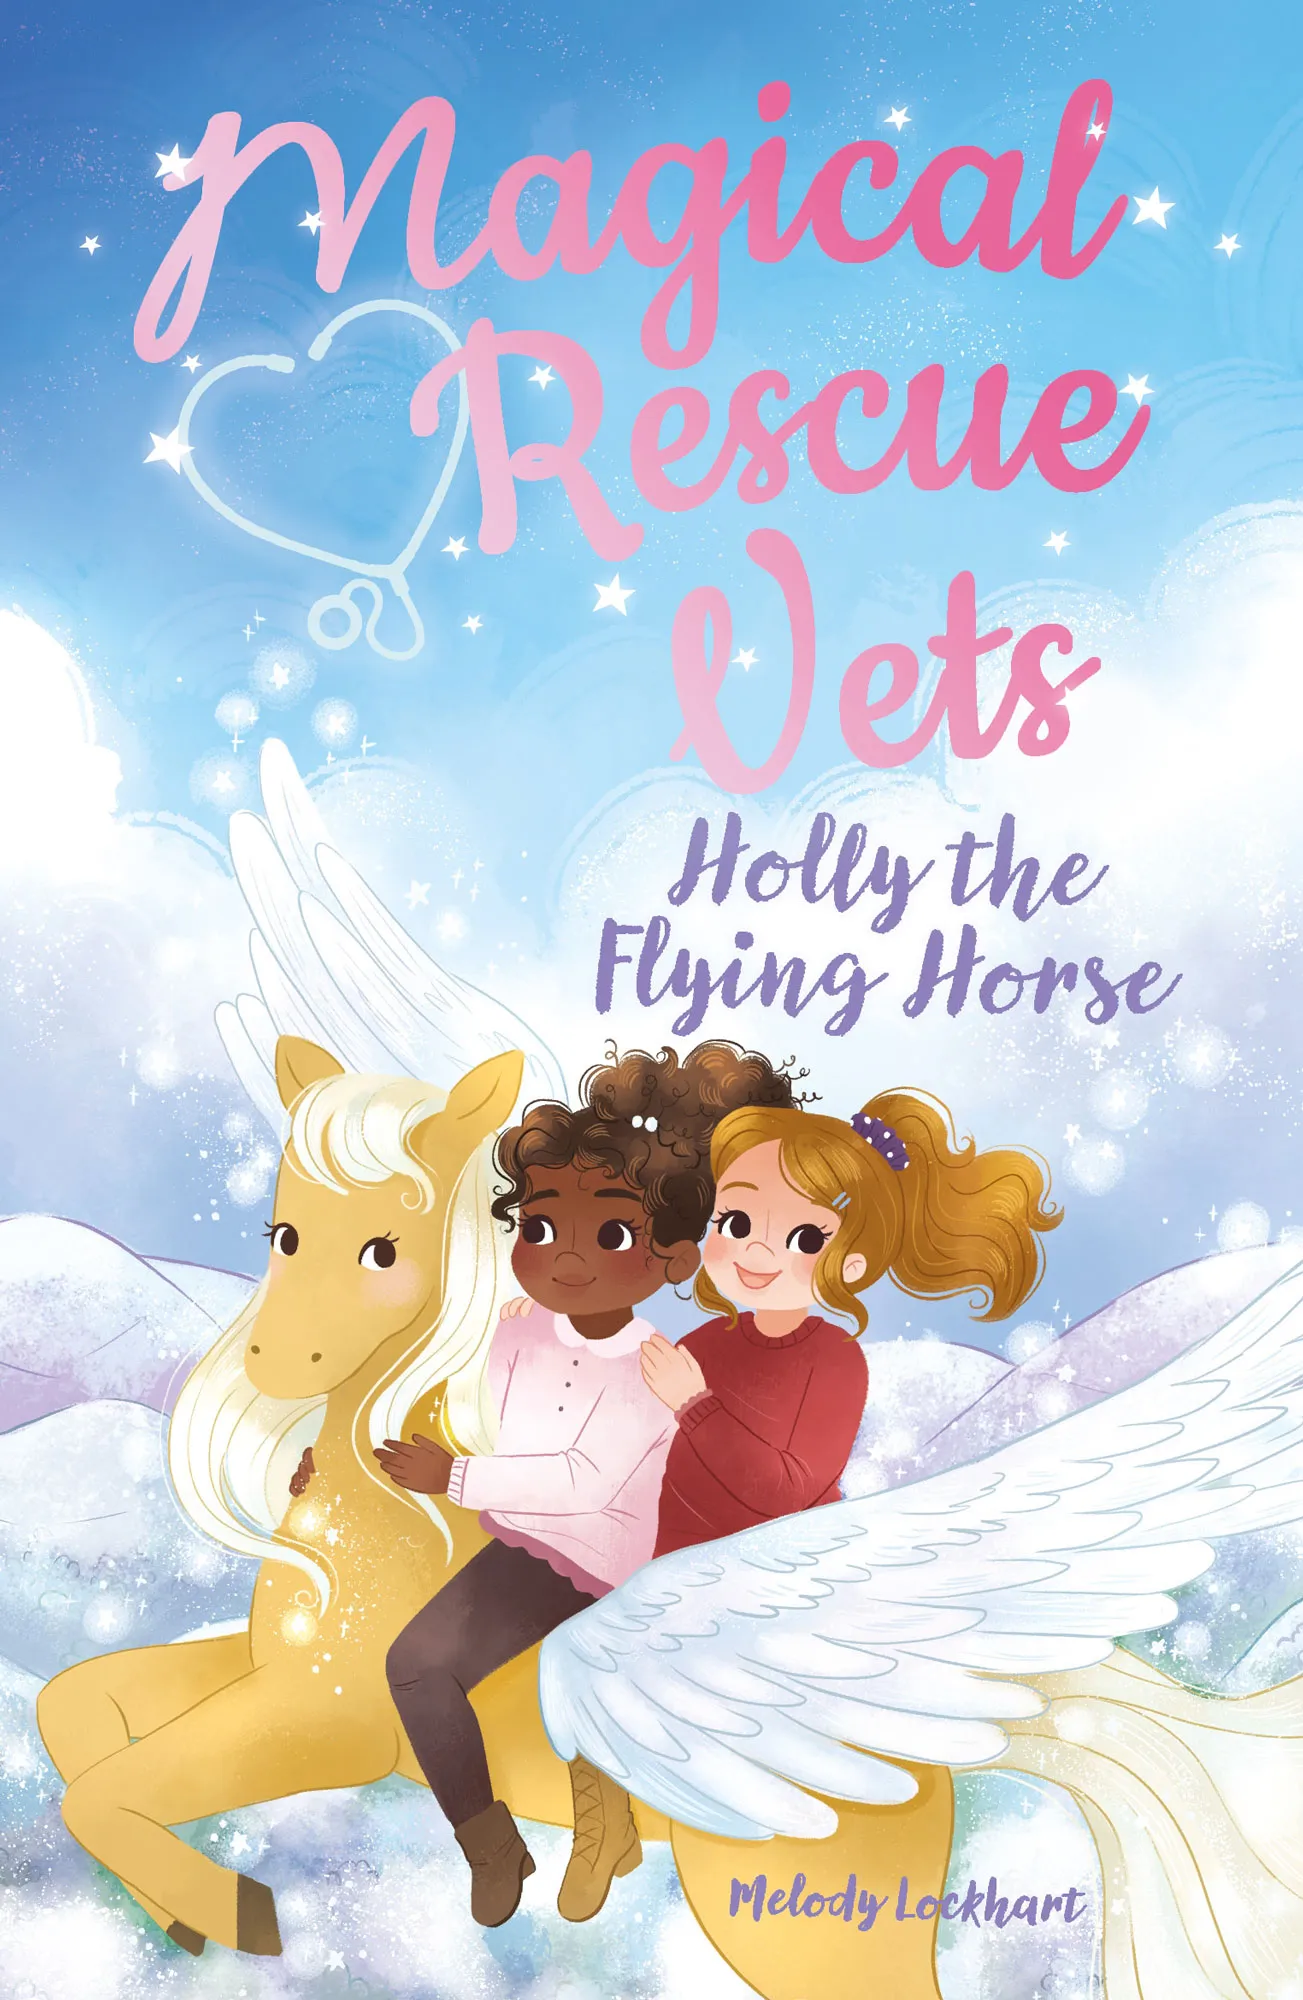 Holly the Flying Horse (Magical Rescue Vets #4)